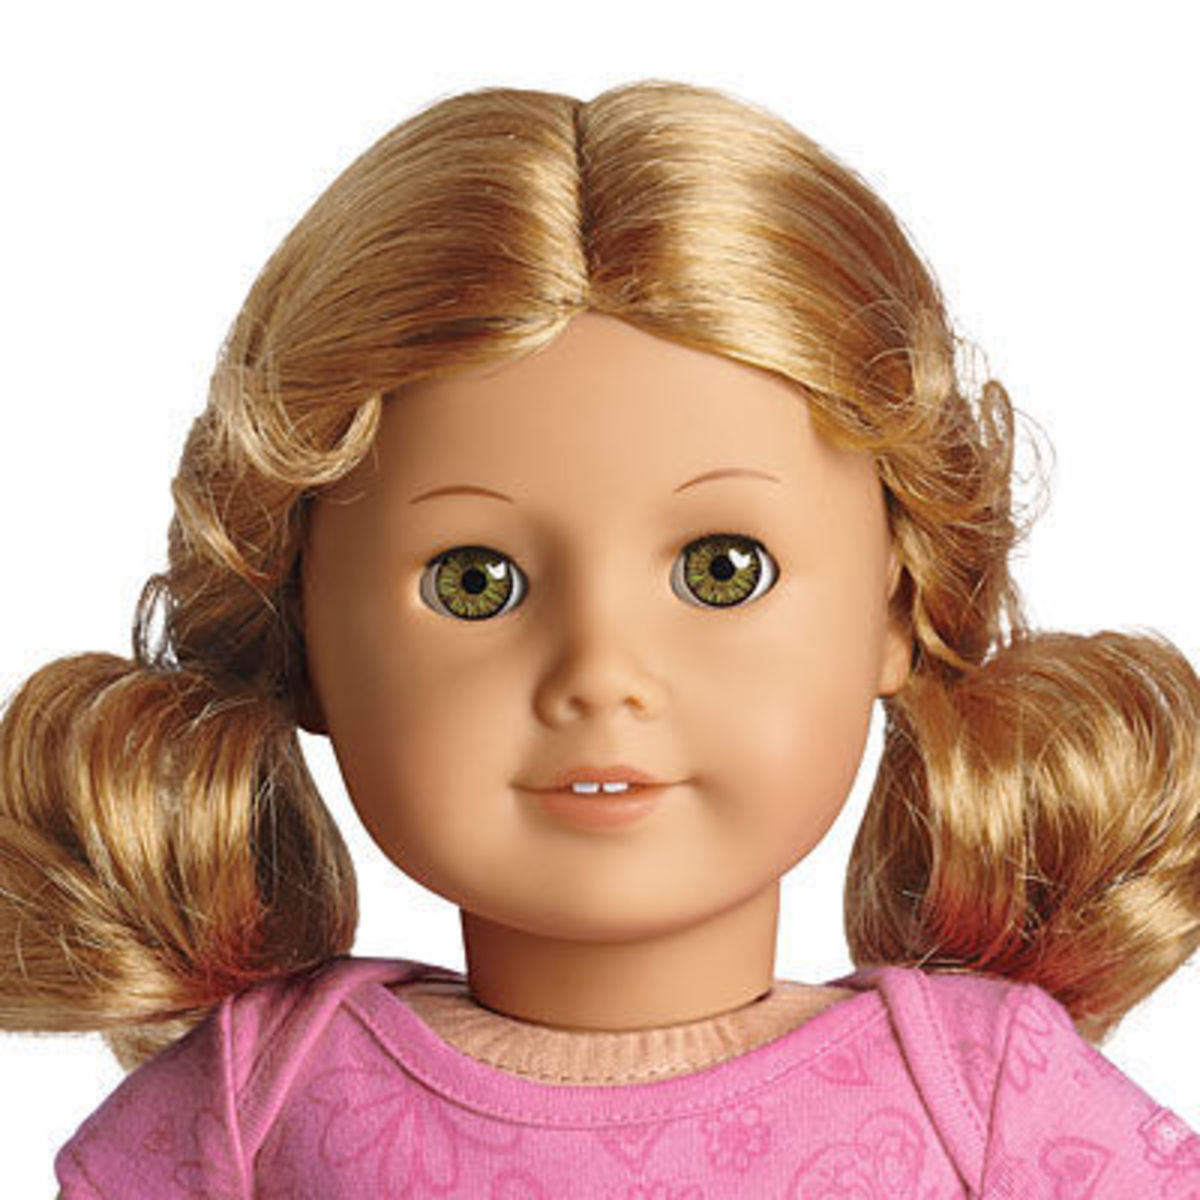 My Favorite Truly Me Dolls From American Girl Hubpages 